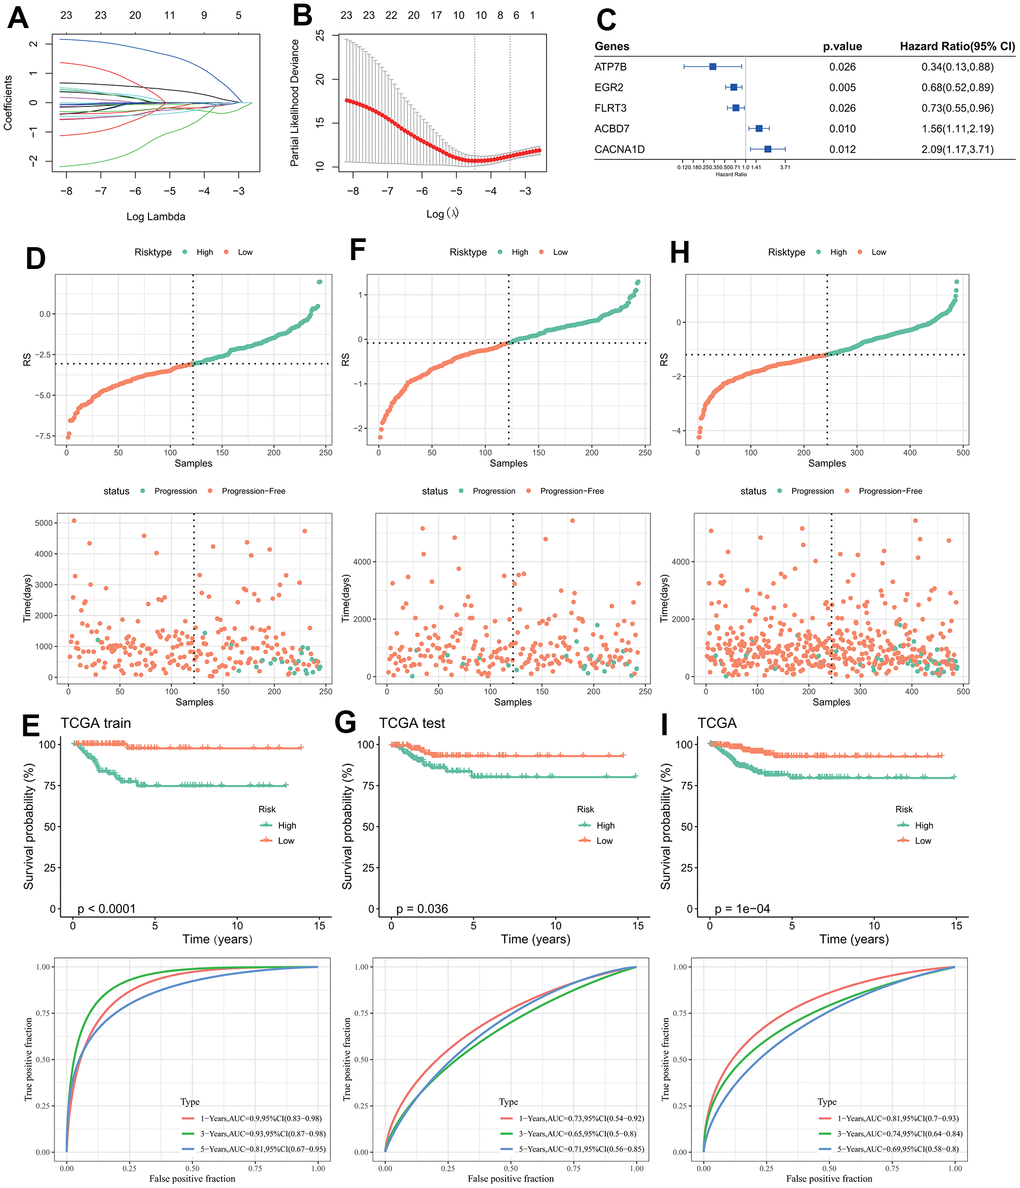 Design and validation of RiskScore model. (A) The trajectory of each independent variable changing with lambda; (B) Confidence interval under lambda; (C) Forest map of characteristic gene prognosis; (D, E) RiskScore of TCGA training set, ROC curve and KM curve of RiskScore model; (F, G) RiskScore of TCGA test set, ROC curve and KM curve of RiskScore model; (H, I) RiskScore of TCGA data set, ROC curve and KM curve of RiskScore of model.